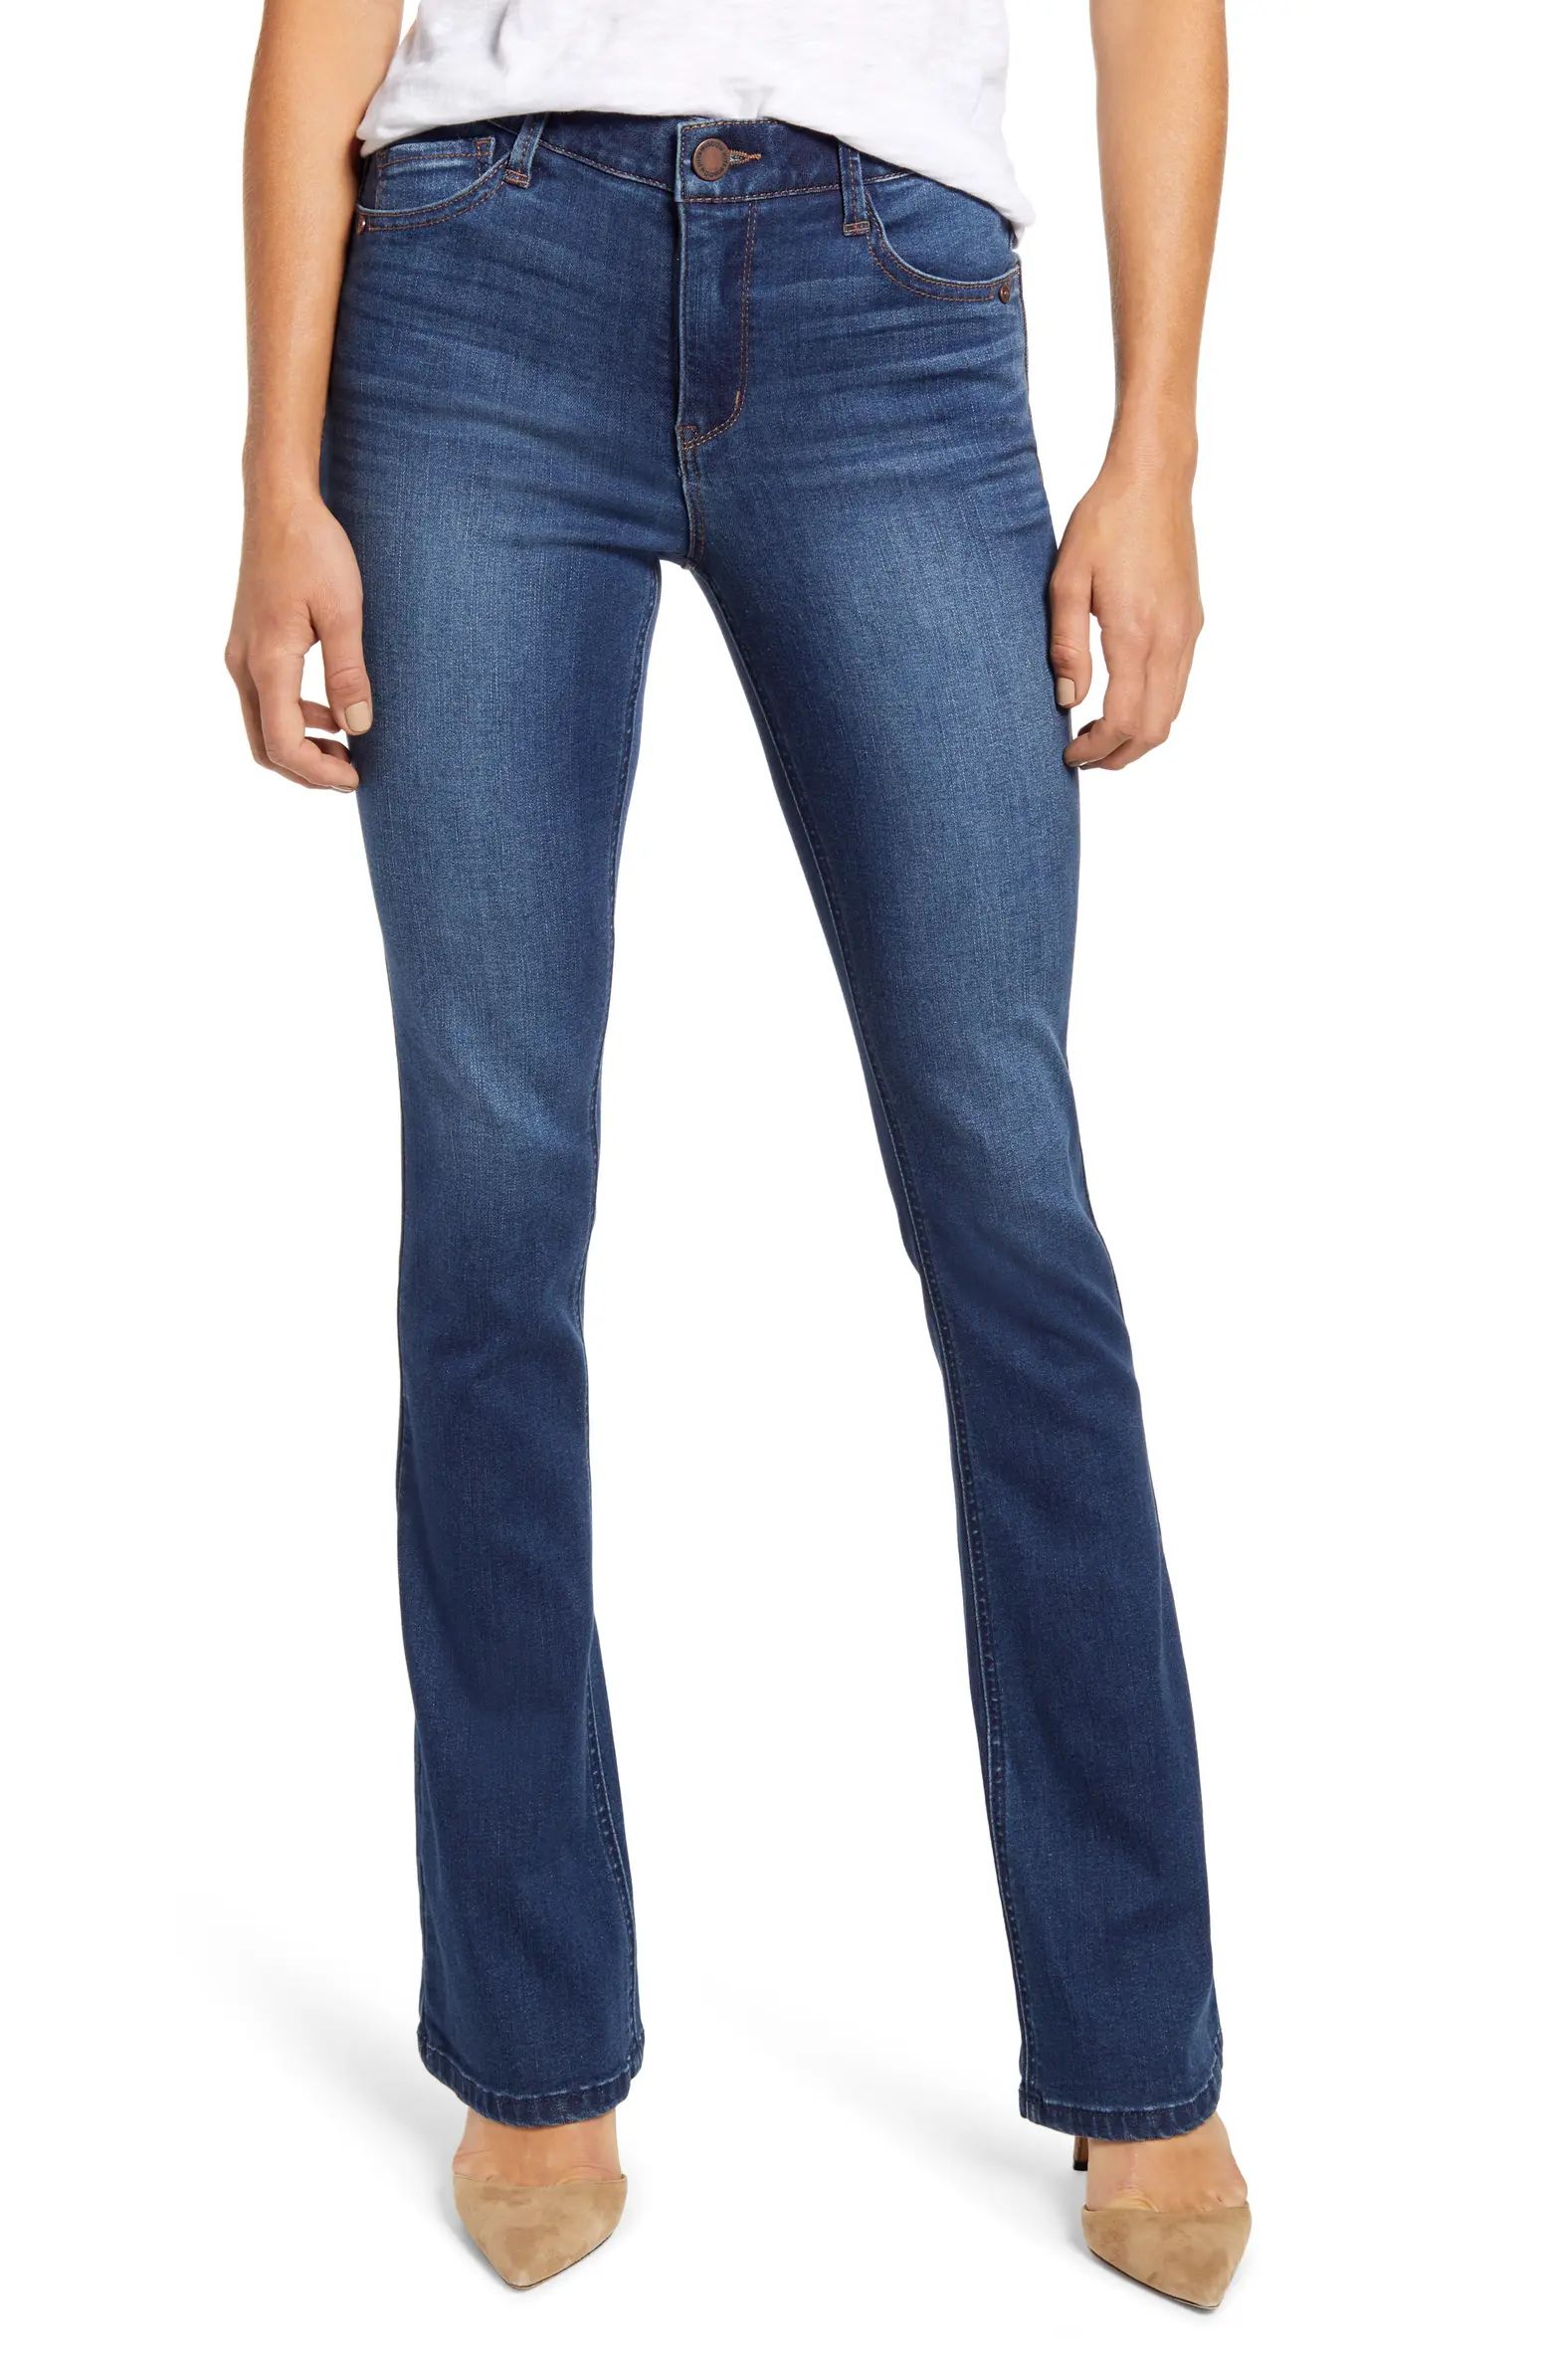 Wit & Wisdom 'Ab'Solution High Waist Itty Bitty Bootcut Jeans | Nordstrom | Nordstrom